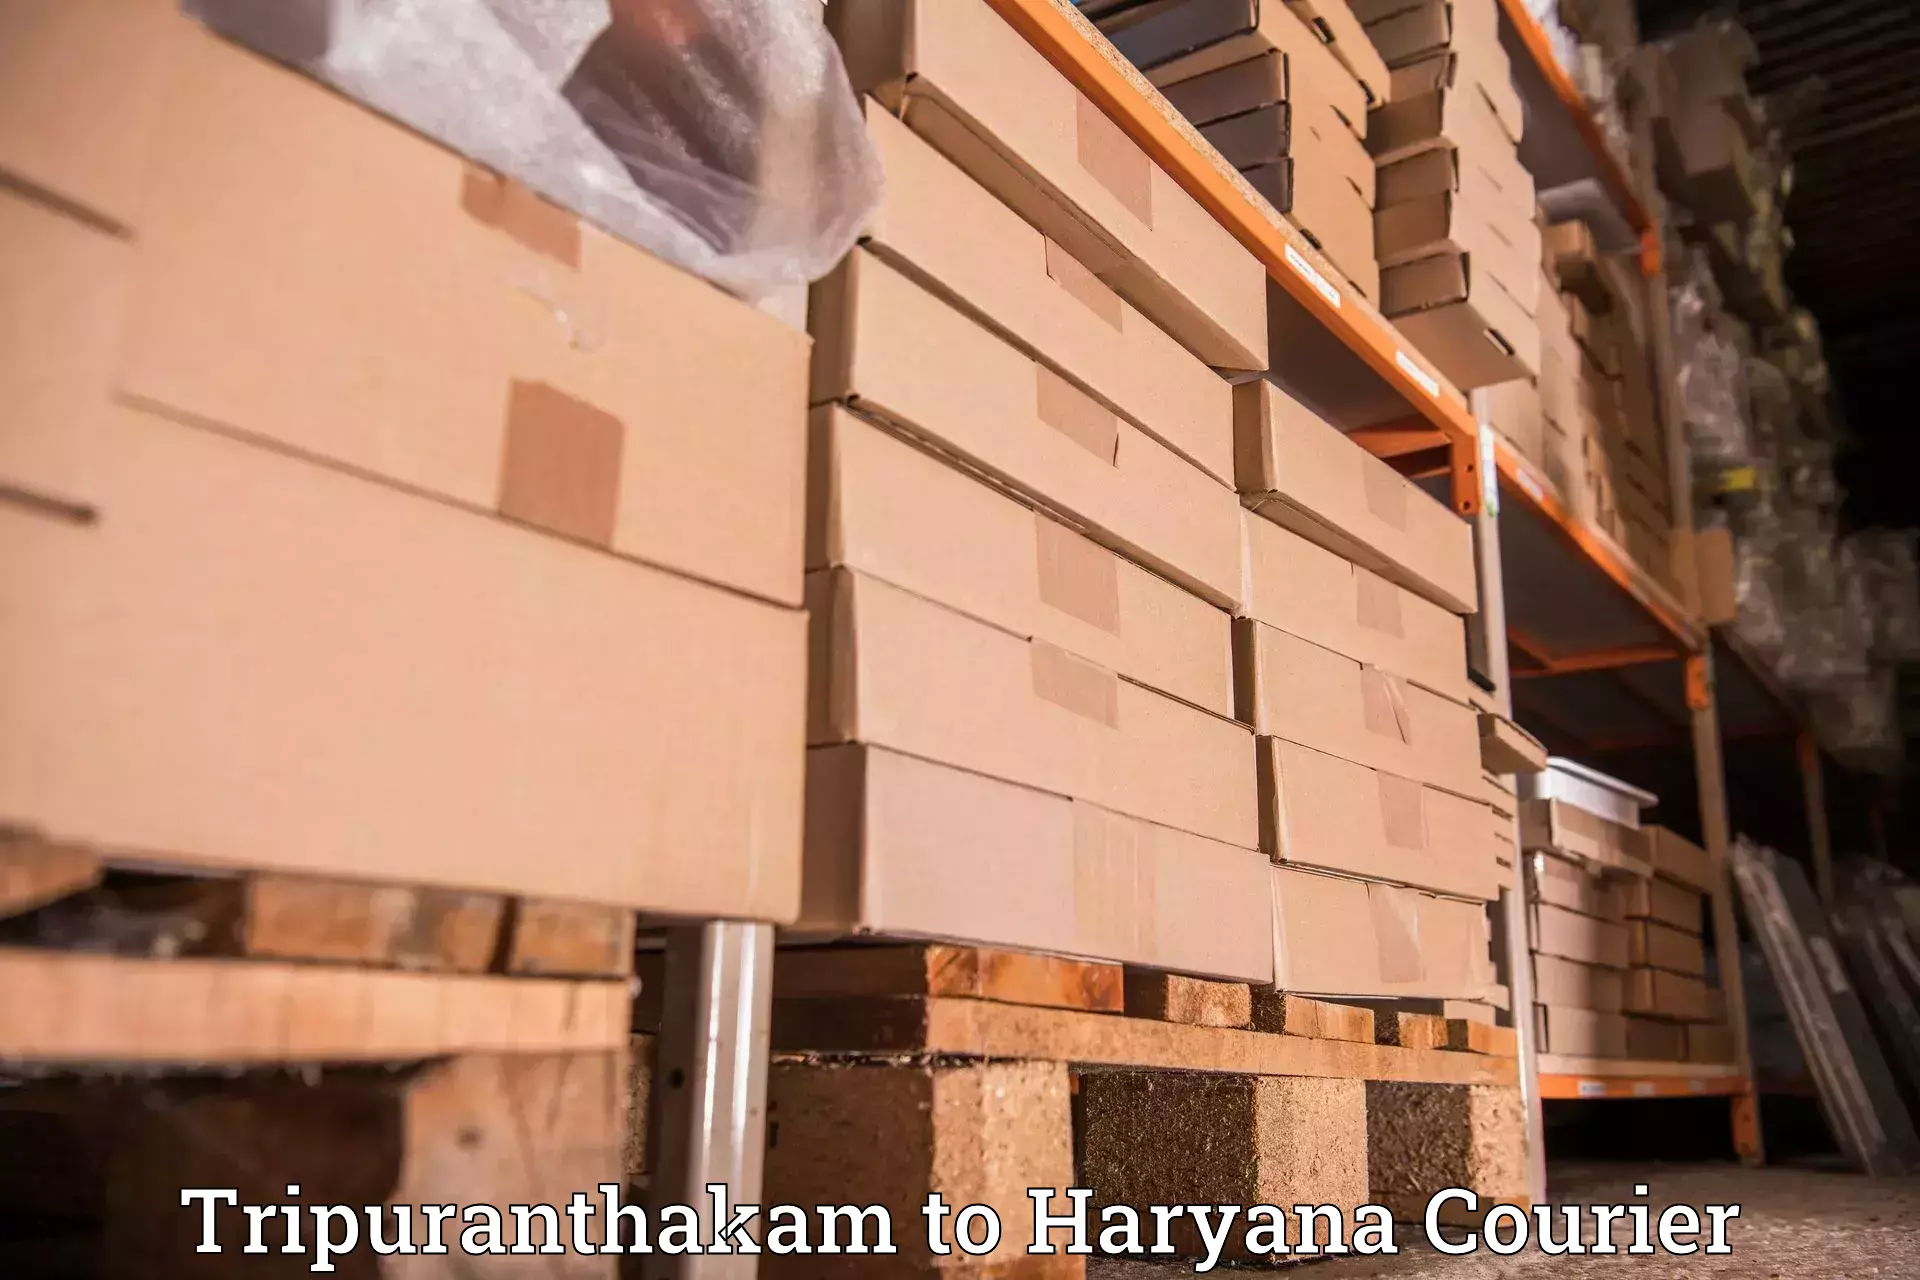 Efficient shipping operations Tripuranthakam to Sonipat